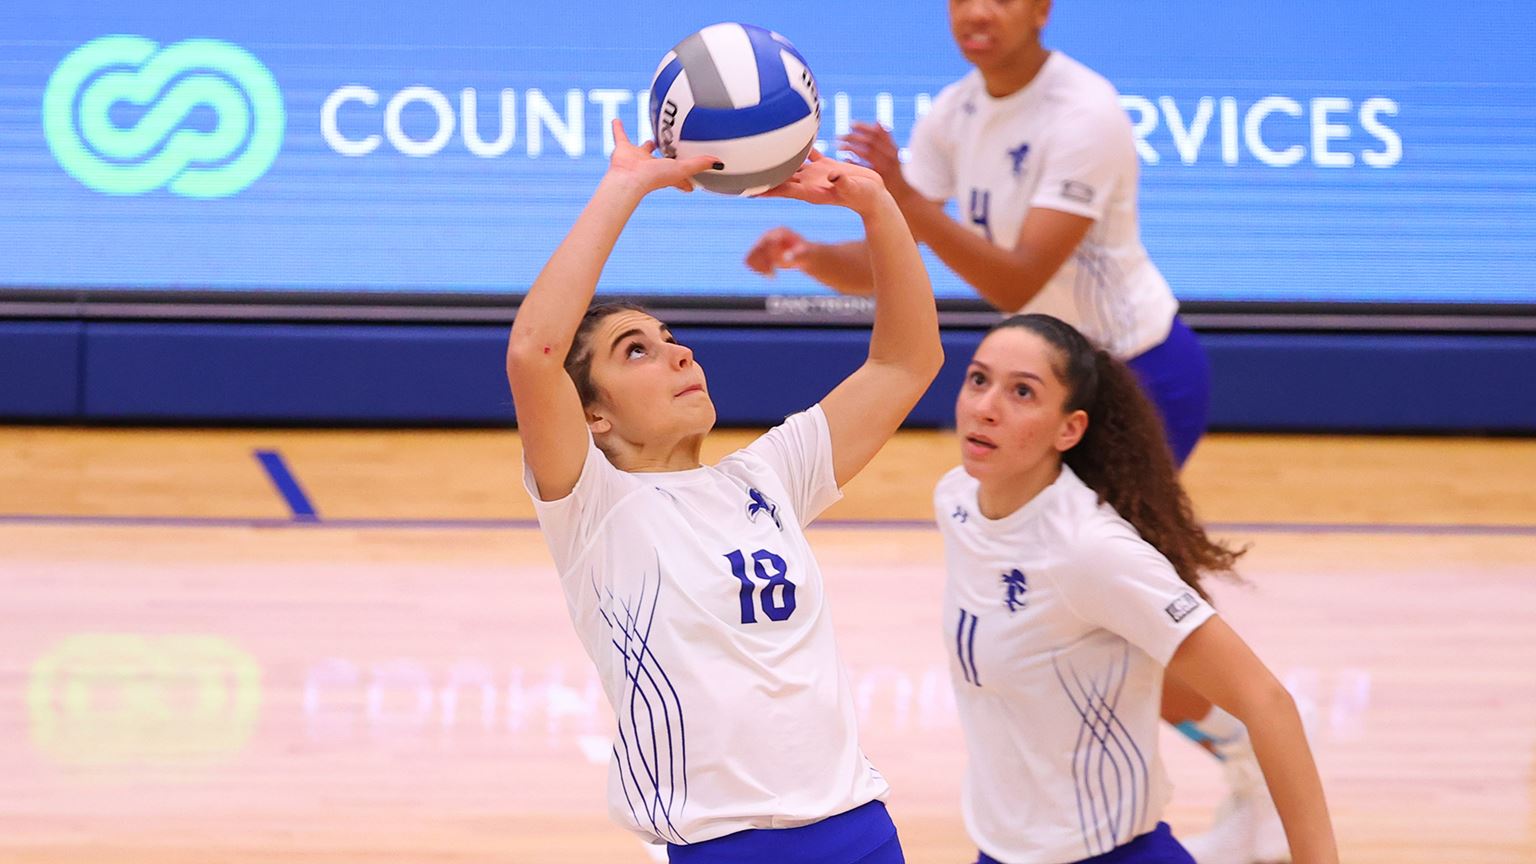 A Seton Hall women's volleyball player hits the ball during a match.